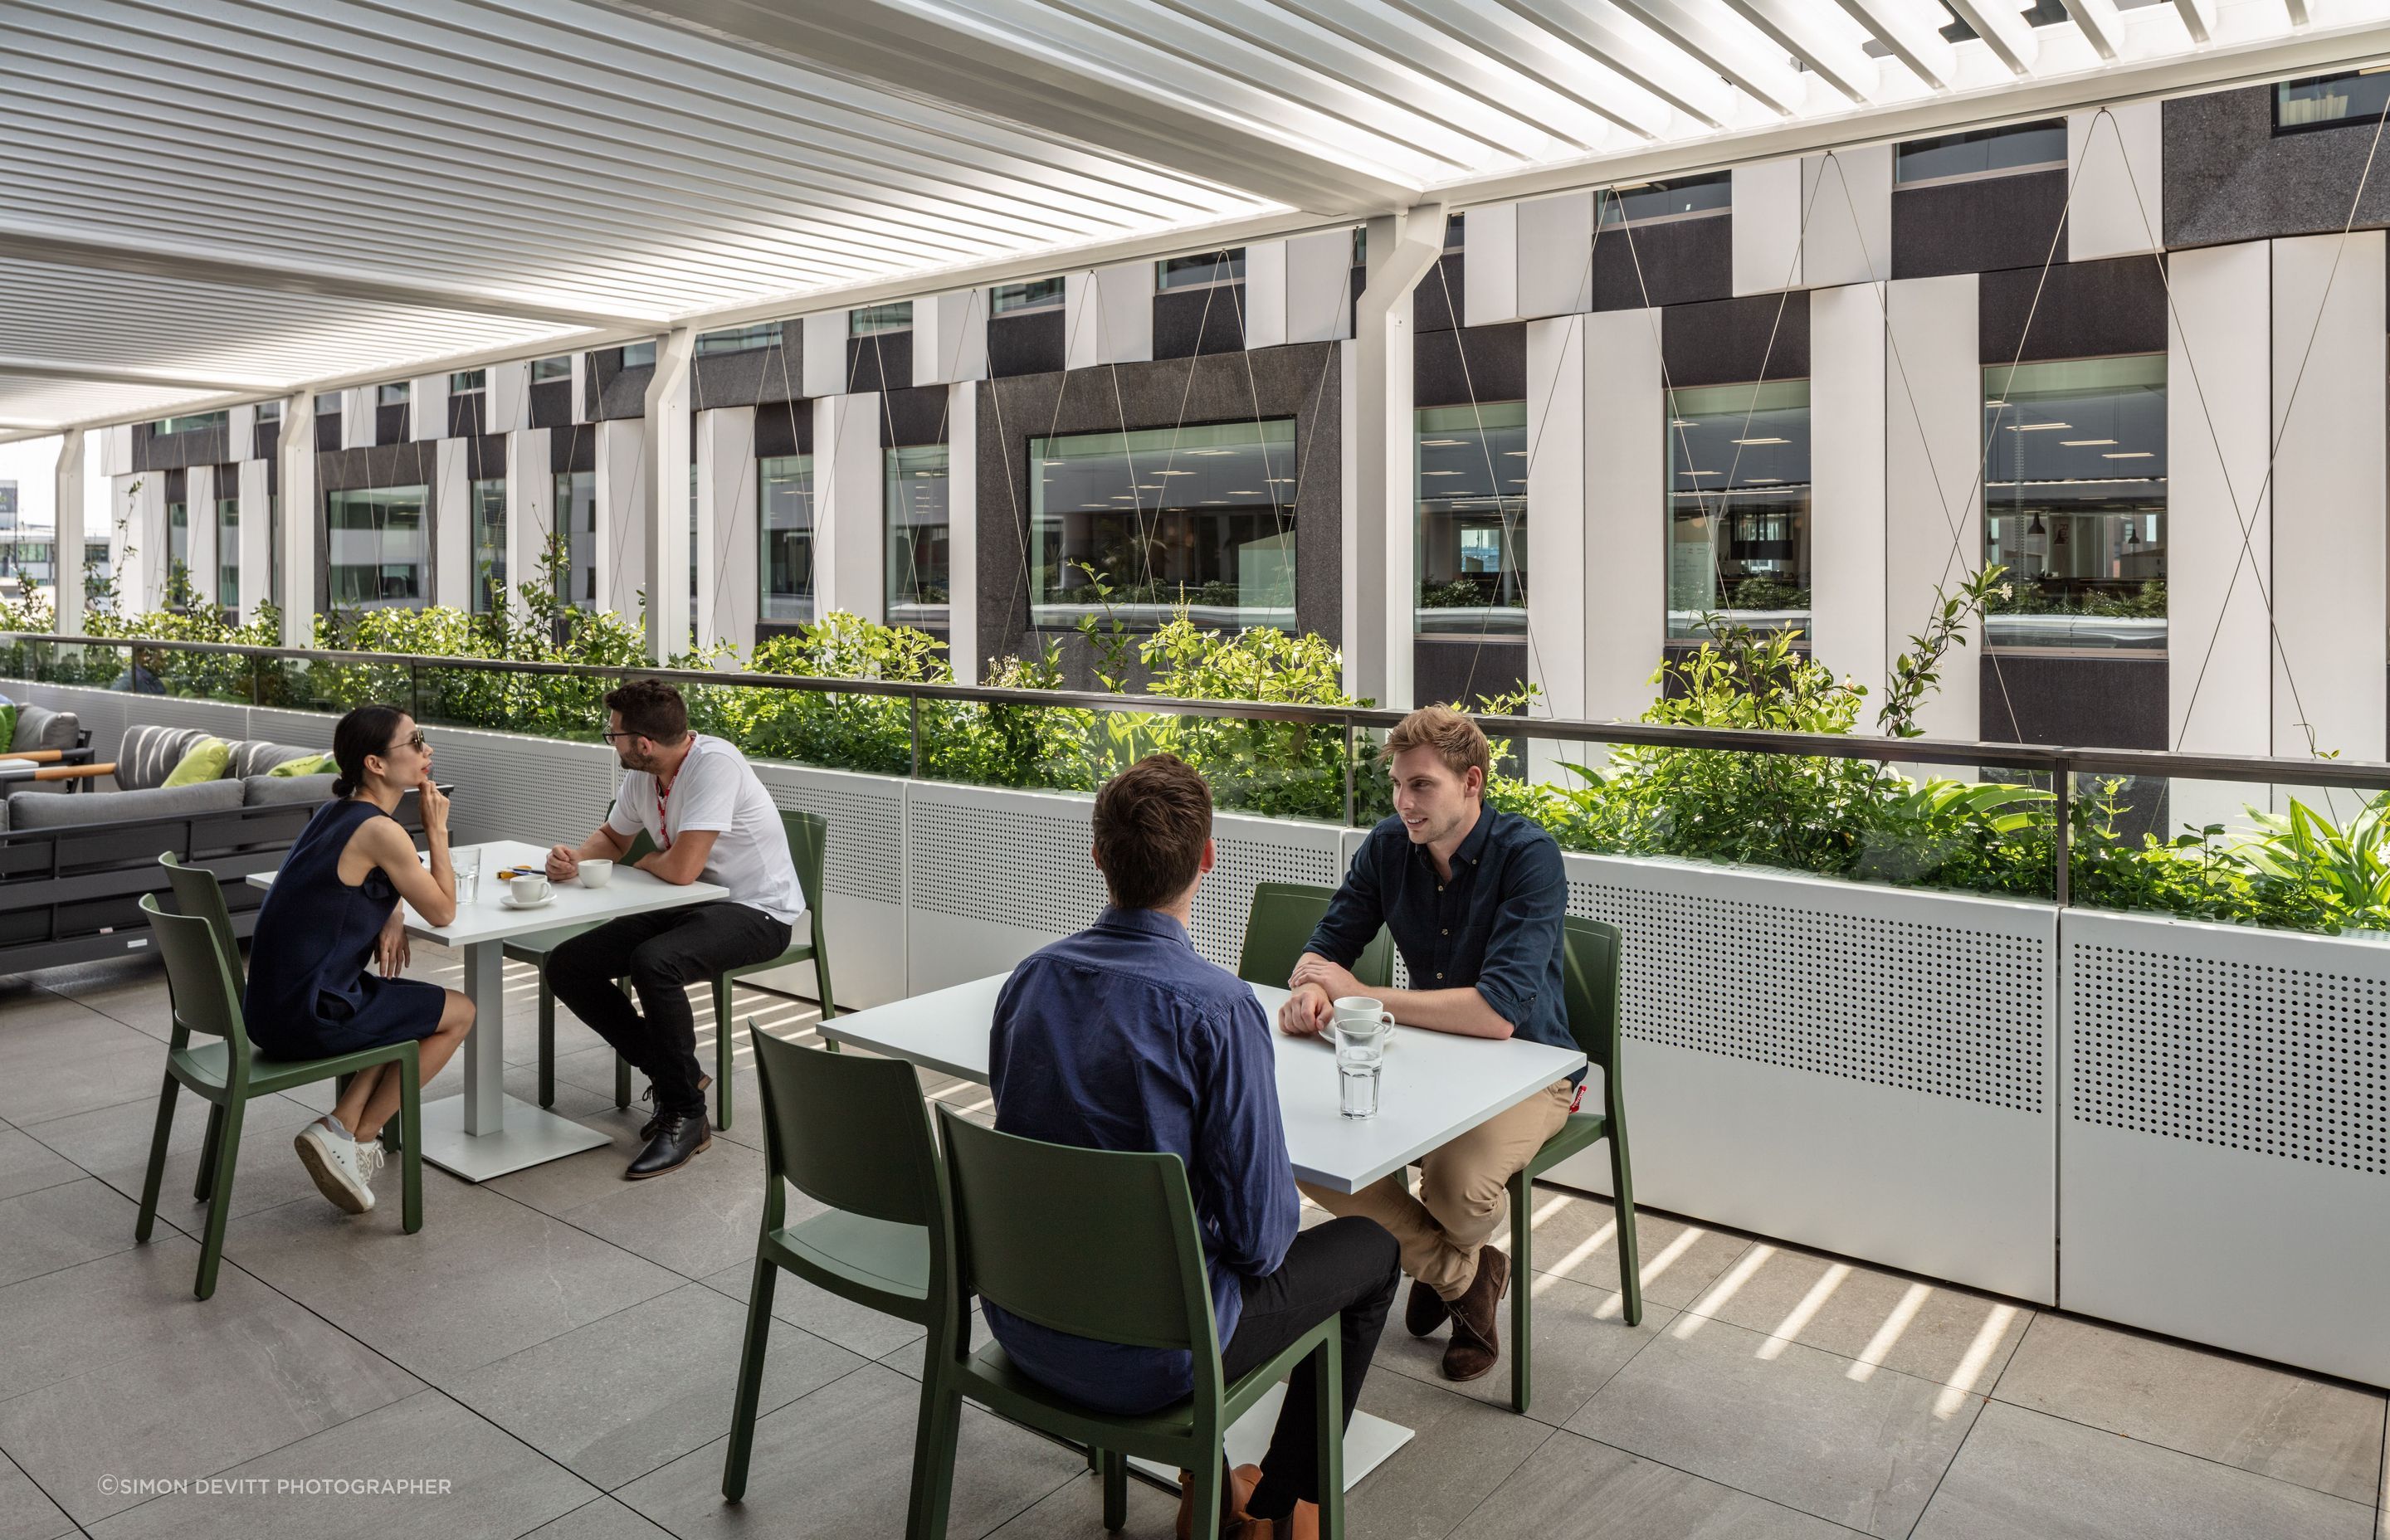 A series of external terraces and winter garden spaces blur the boundaries of the traditional office/workspace allowing occupants to be outside without leaving the building.